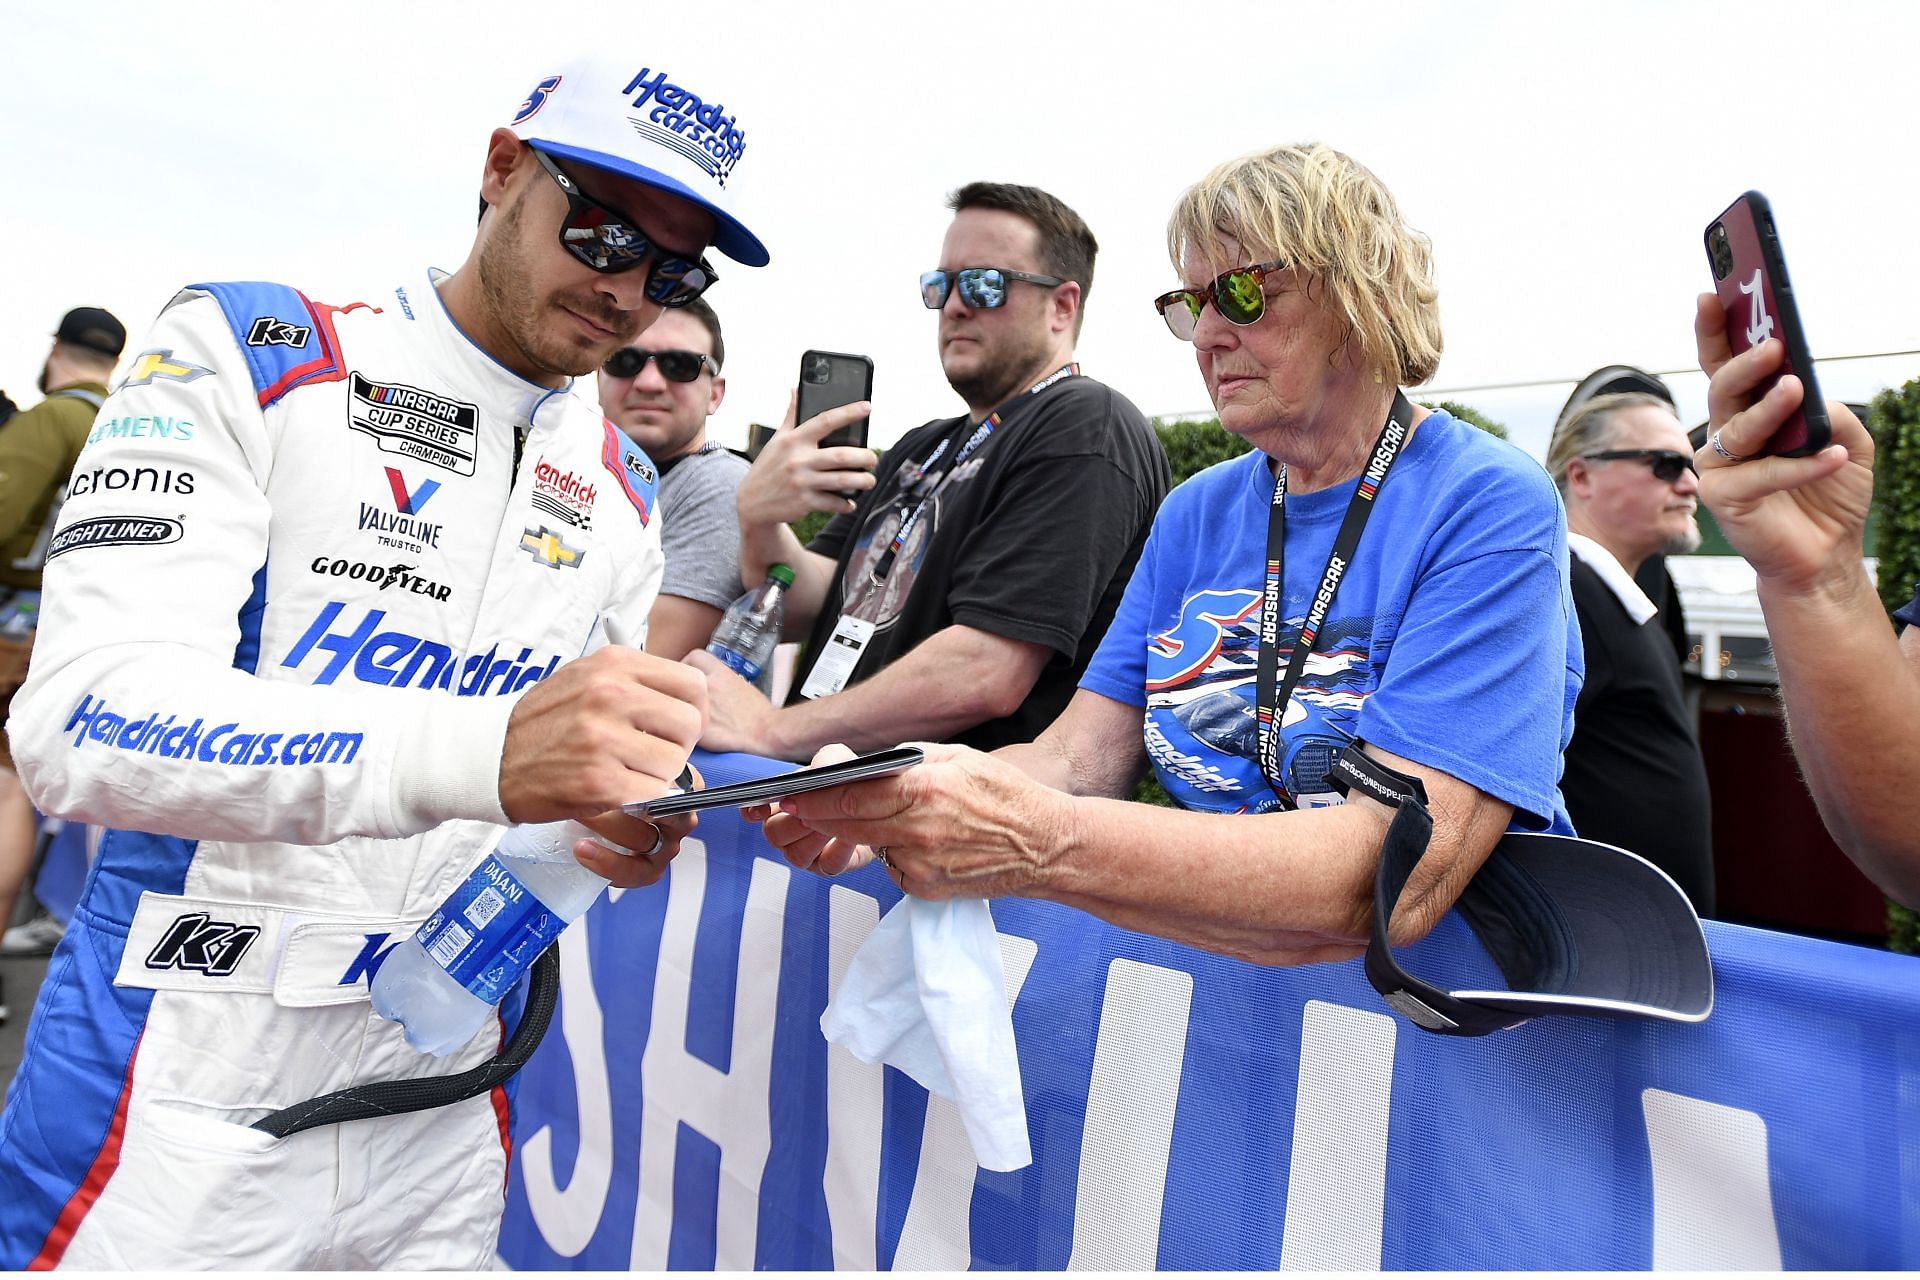 Kyle Larson signs autographs for fans on the red carpet before the 2022 NASCAR Cup Series Ally 400 at Nashville Superspeedway in Lebanon, Tennessee (Photo by Logan Riely/Getty Images)